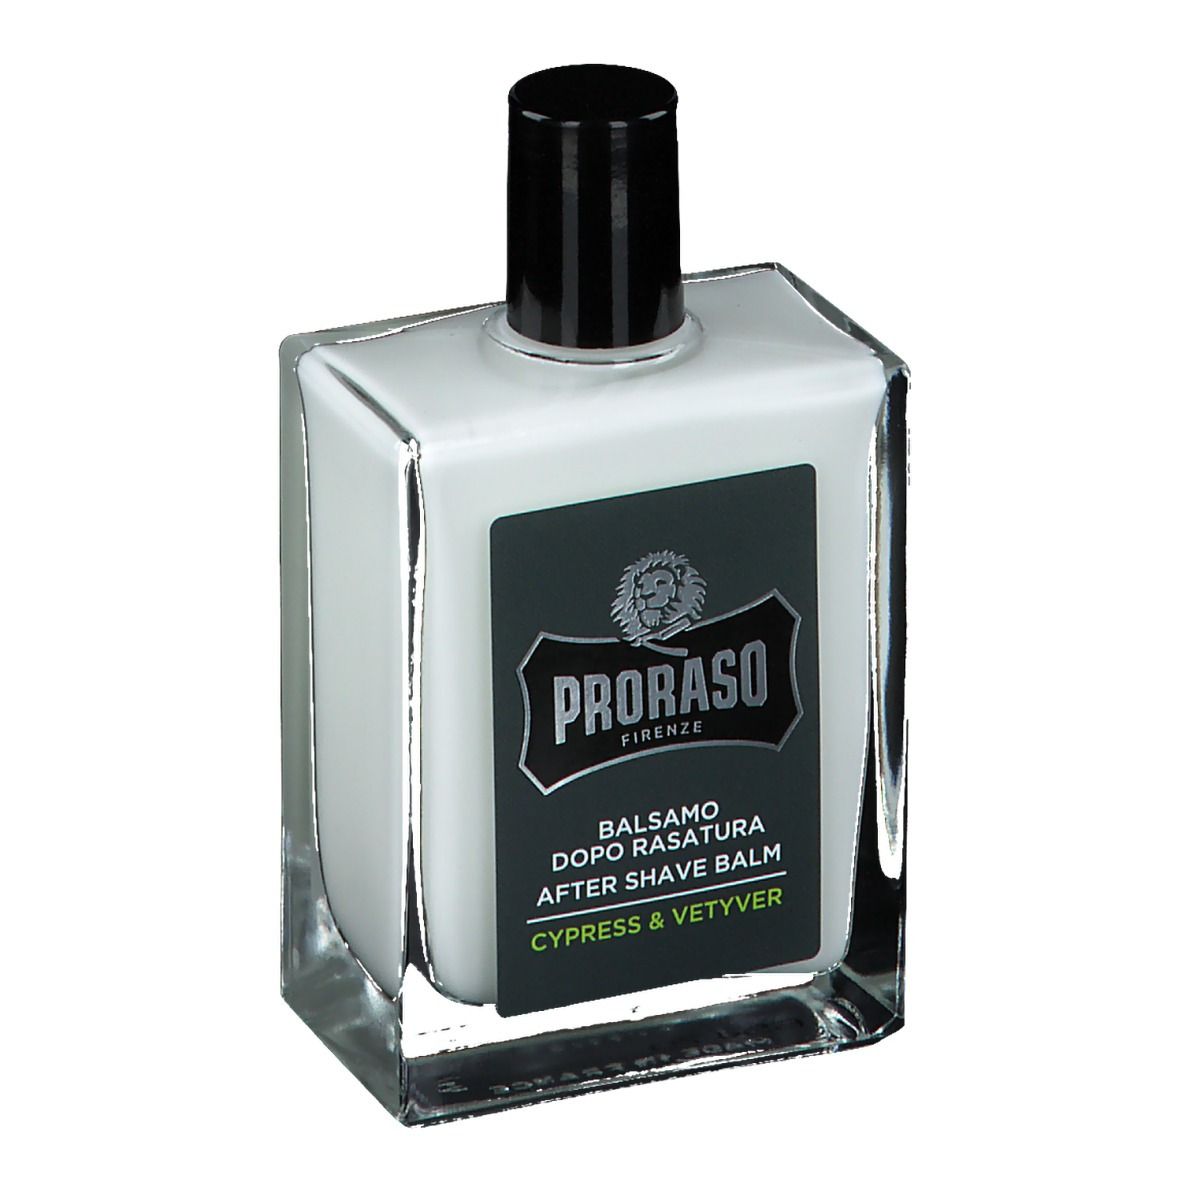 EUROPHARMA GROUP Proraso Cypress & Vetyver After Shave Balsam